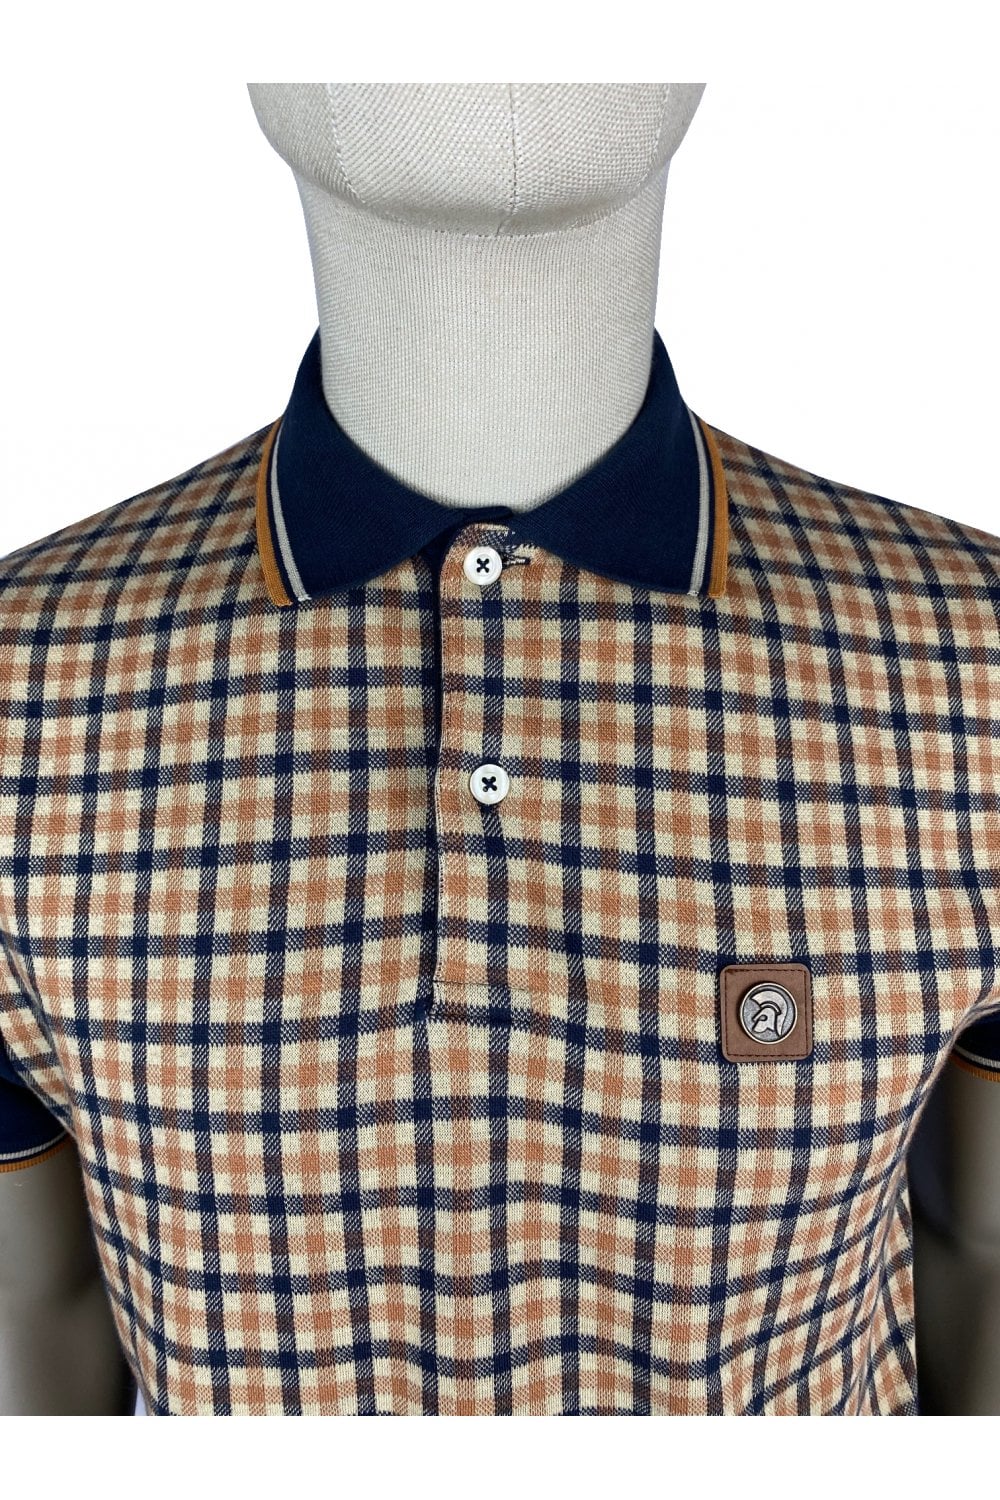 Trojan Gingham Check Polo in Navy